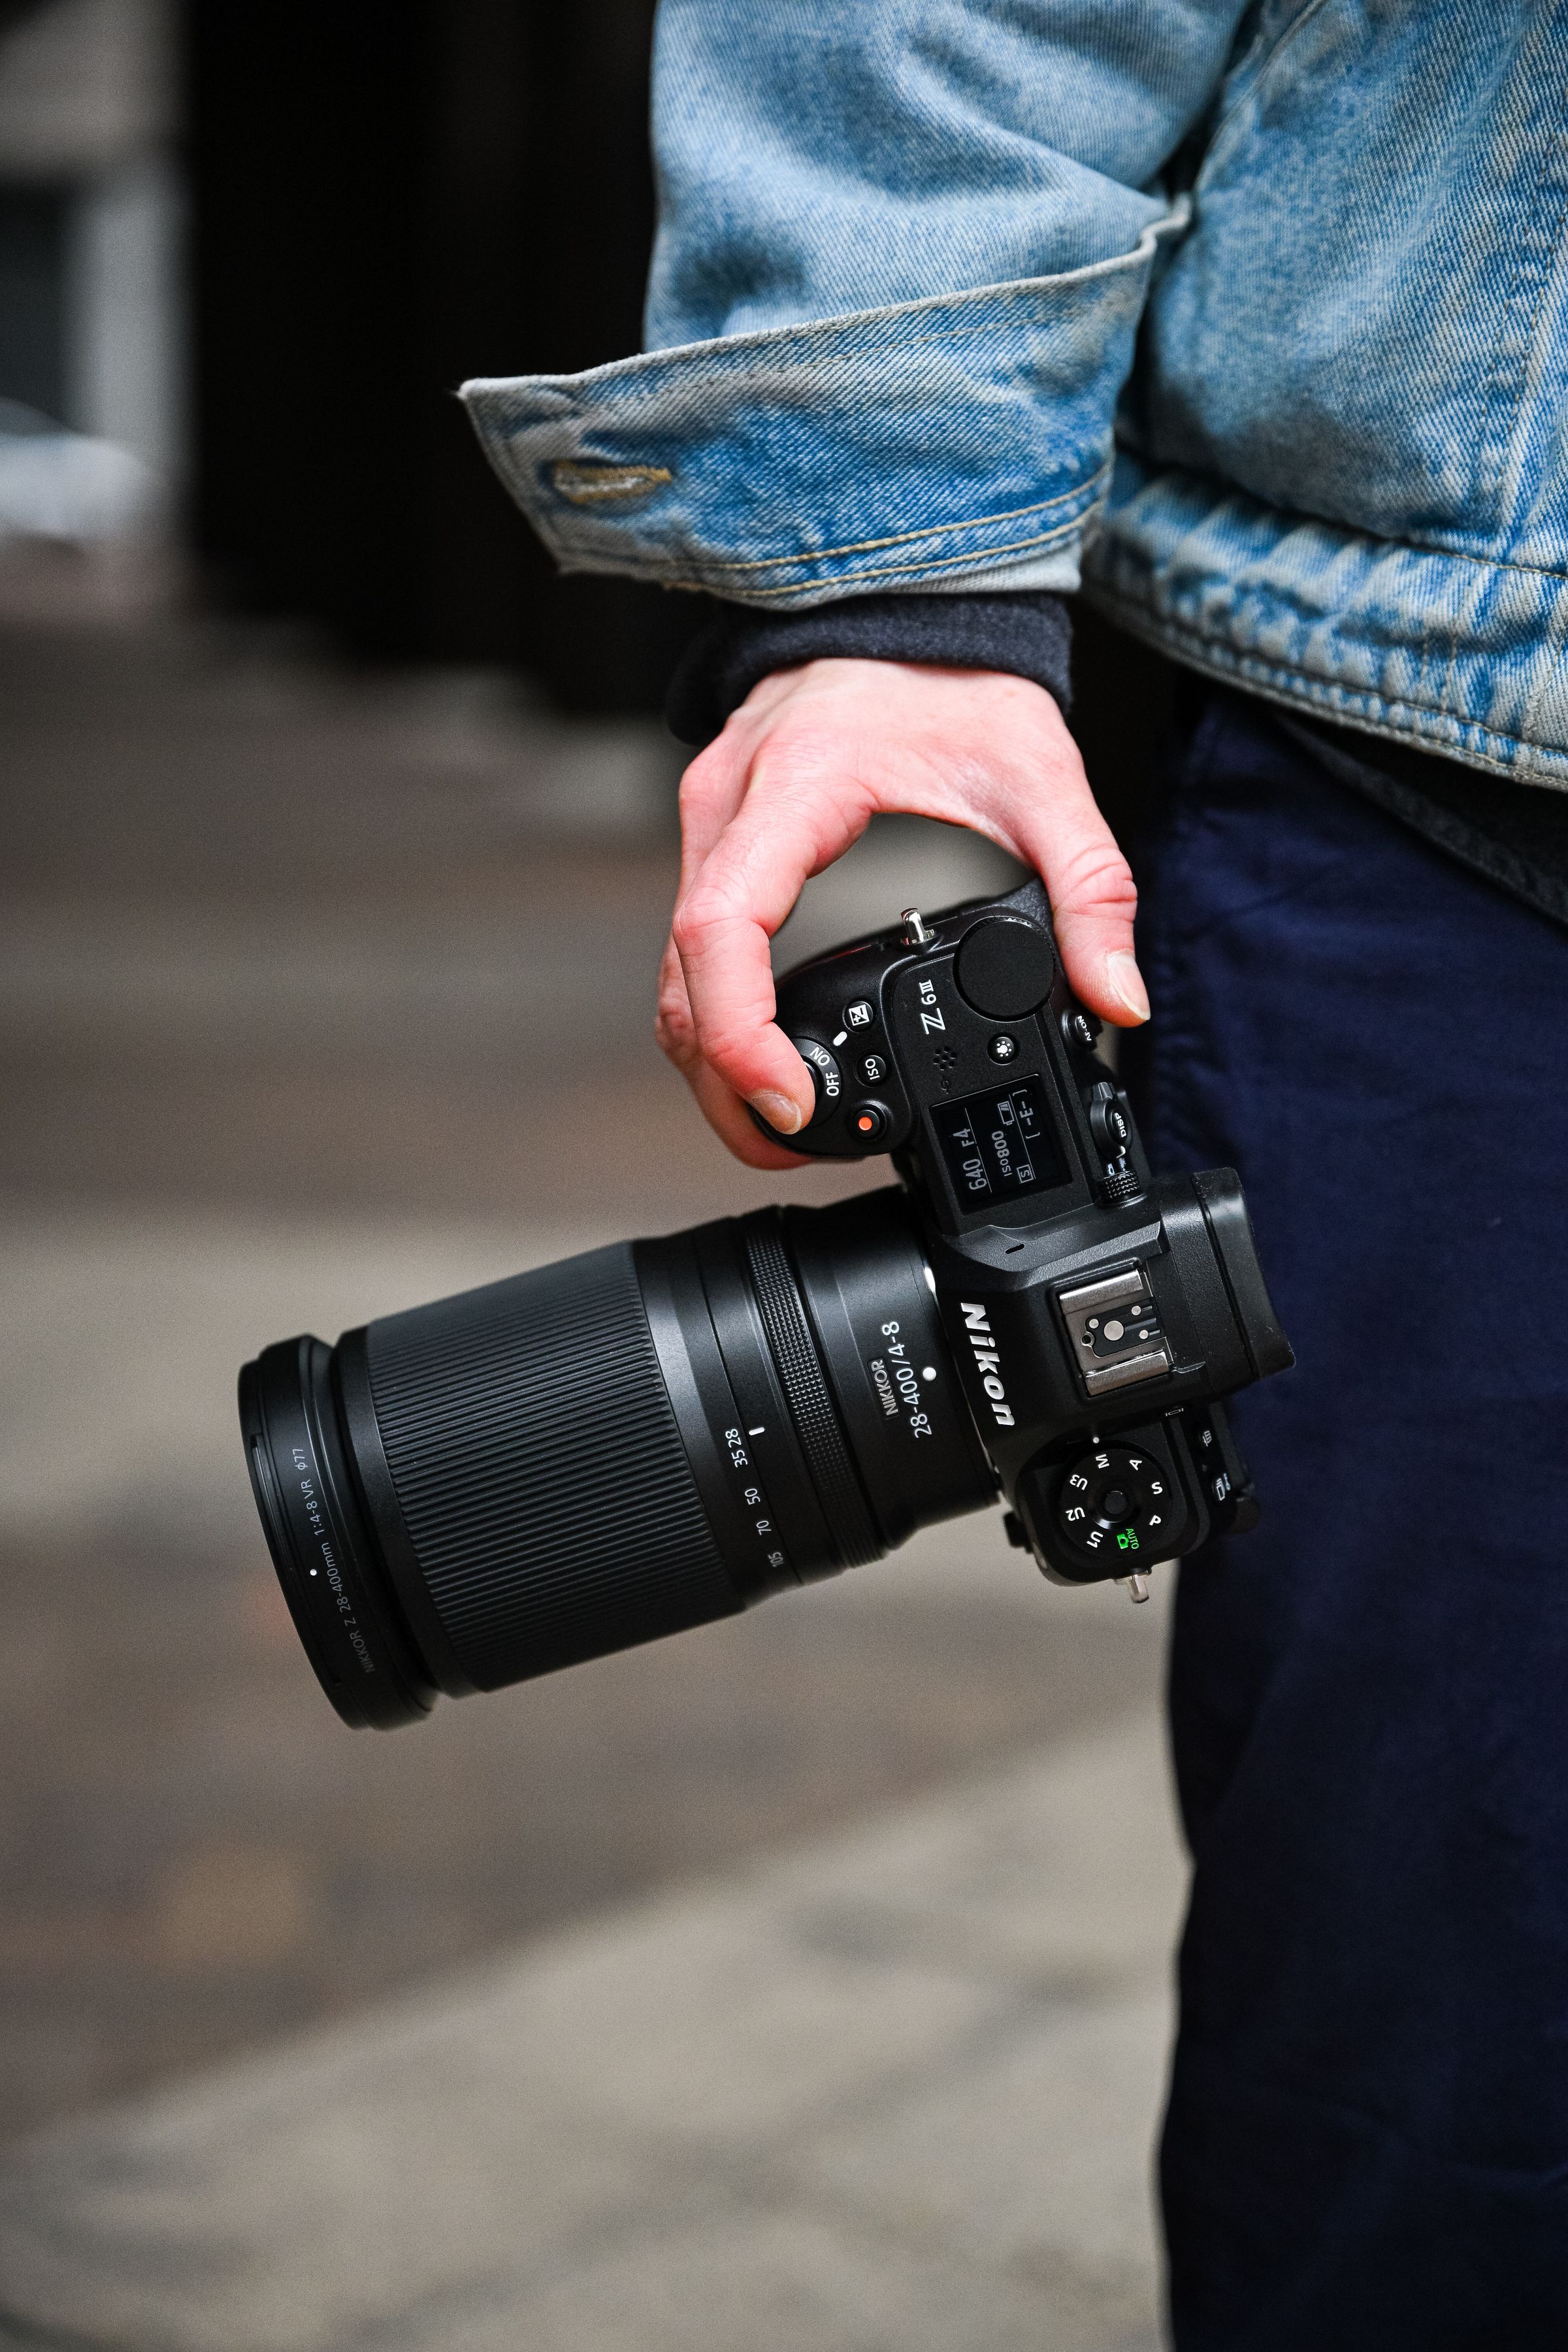 The handgrip on the Nikon Z6 III is deep enough for long-term comfort.